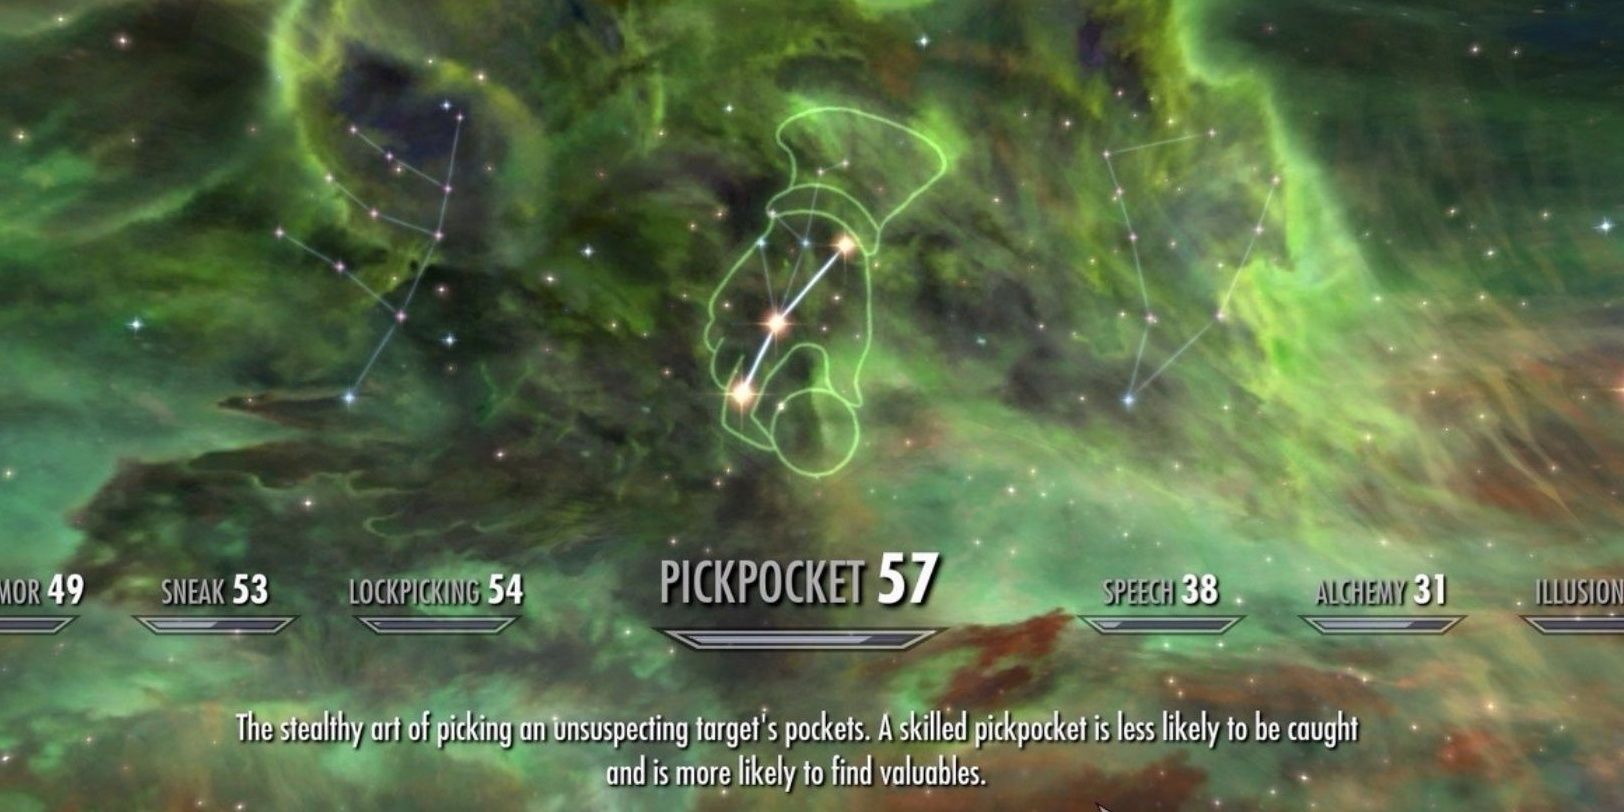 Skyrim Pickpocket Skill Tree depicting a hand and coin constellation